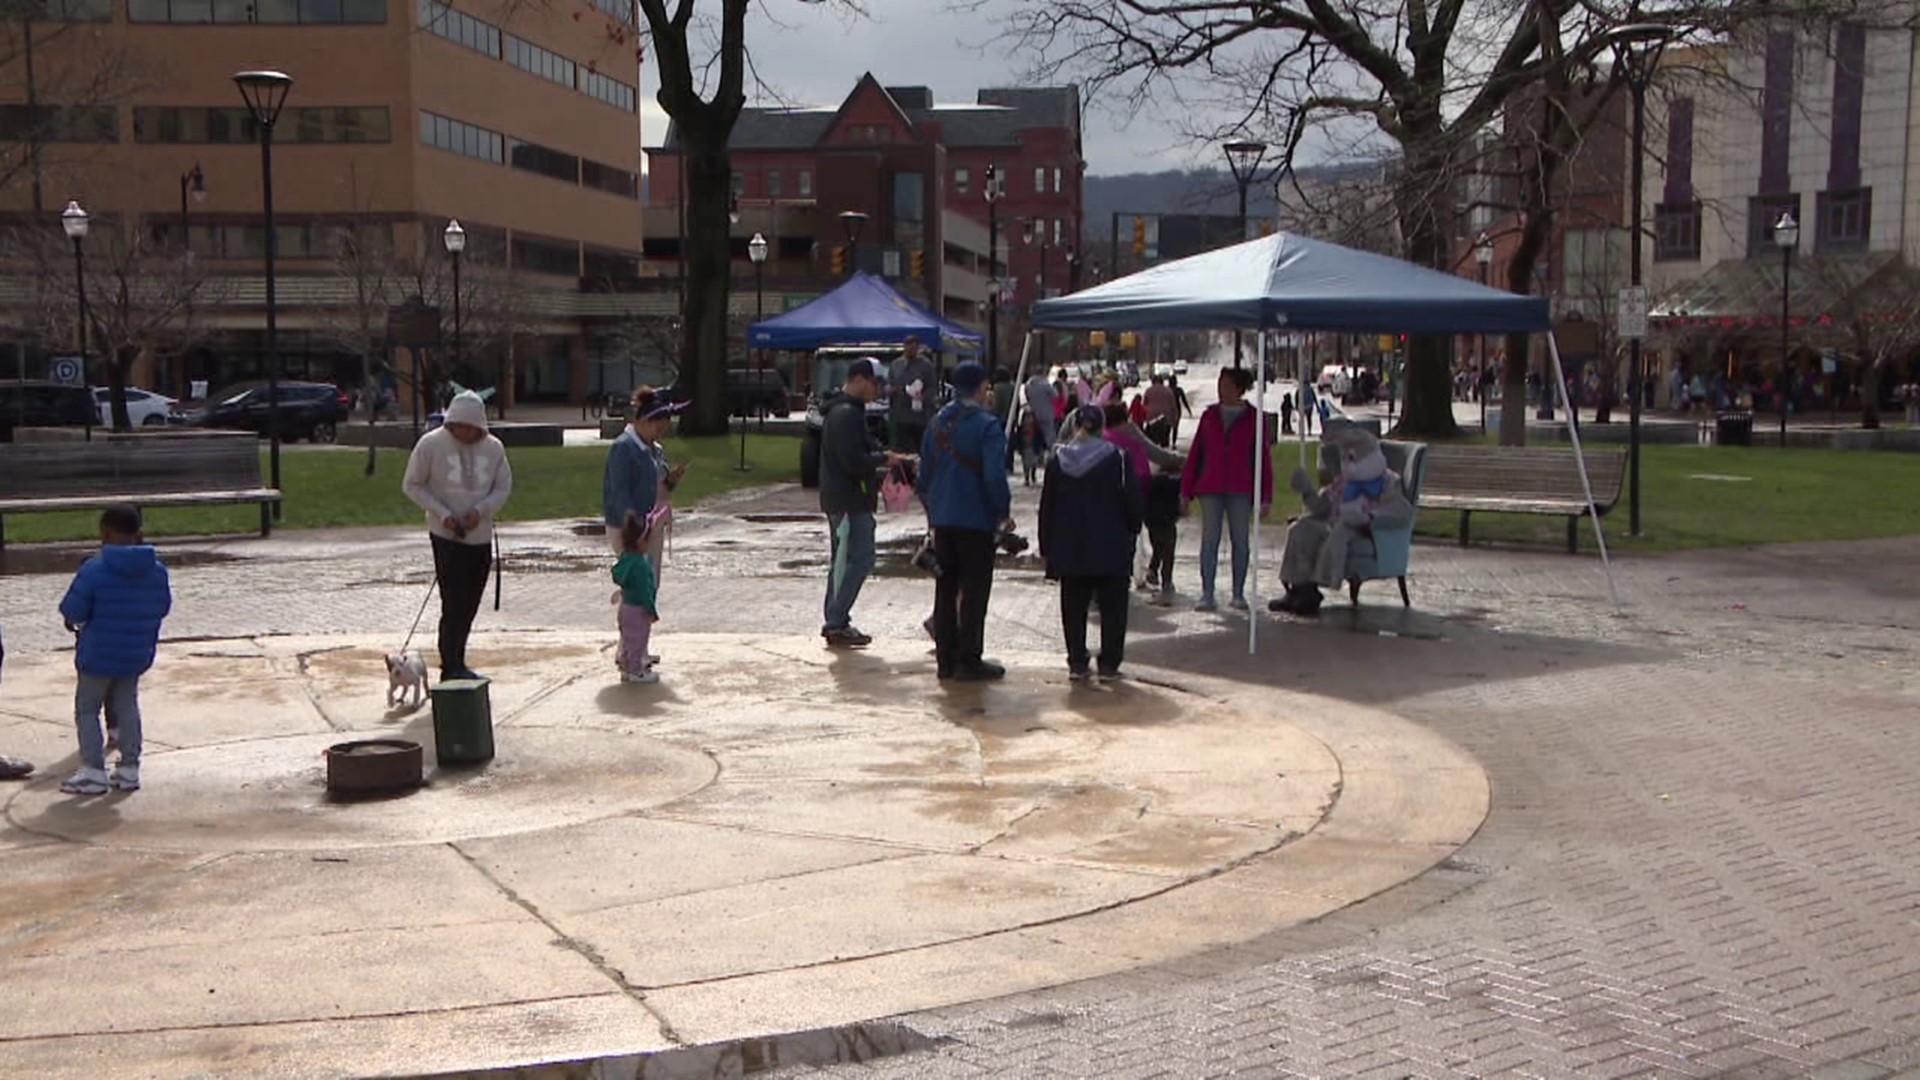 With Easter just over a week away, kids from all over Luzerne County came out to enjoy a big egg hunt.